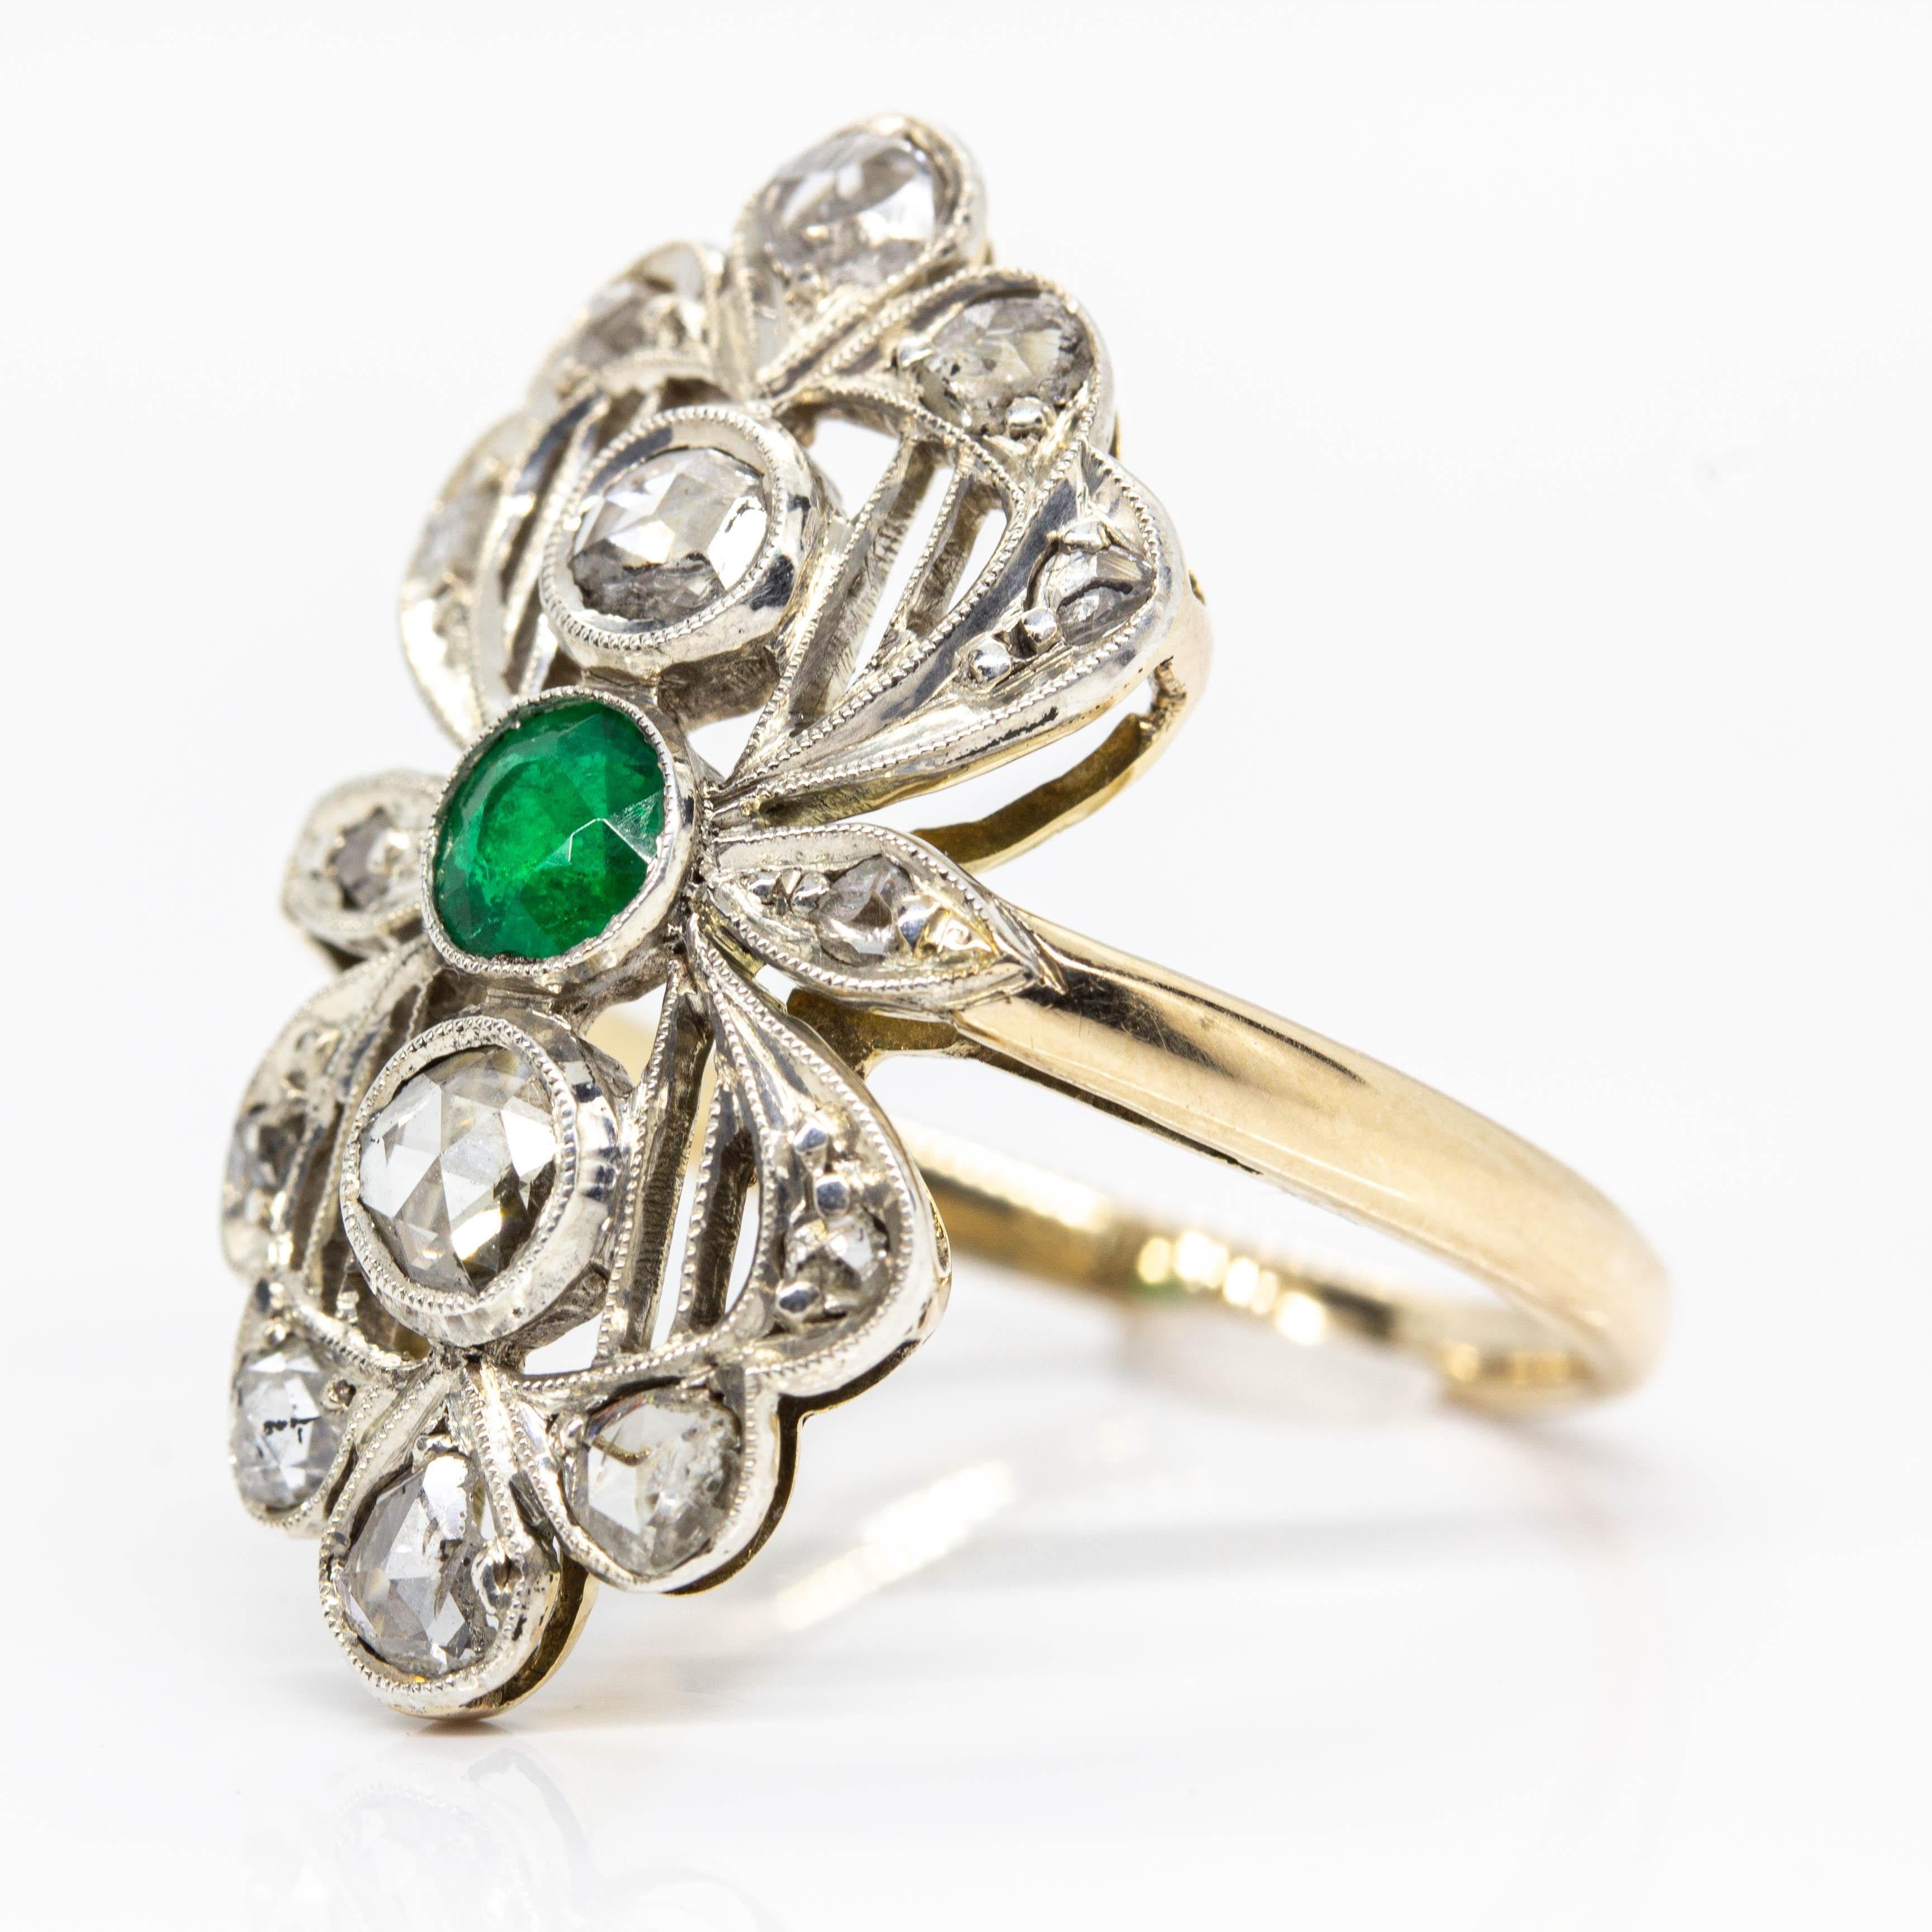 Antique Victorian 18 Karat Gold and Silver Diamonds and Emerald Ring In Excellent Condition For Sale In Miami, FL